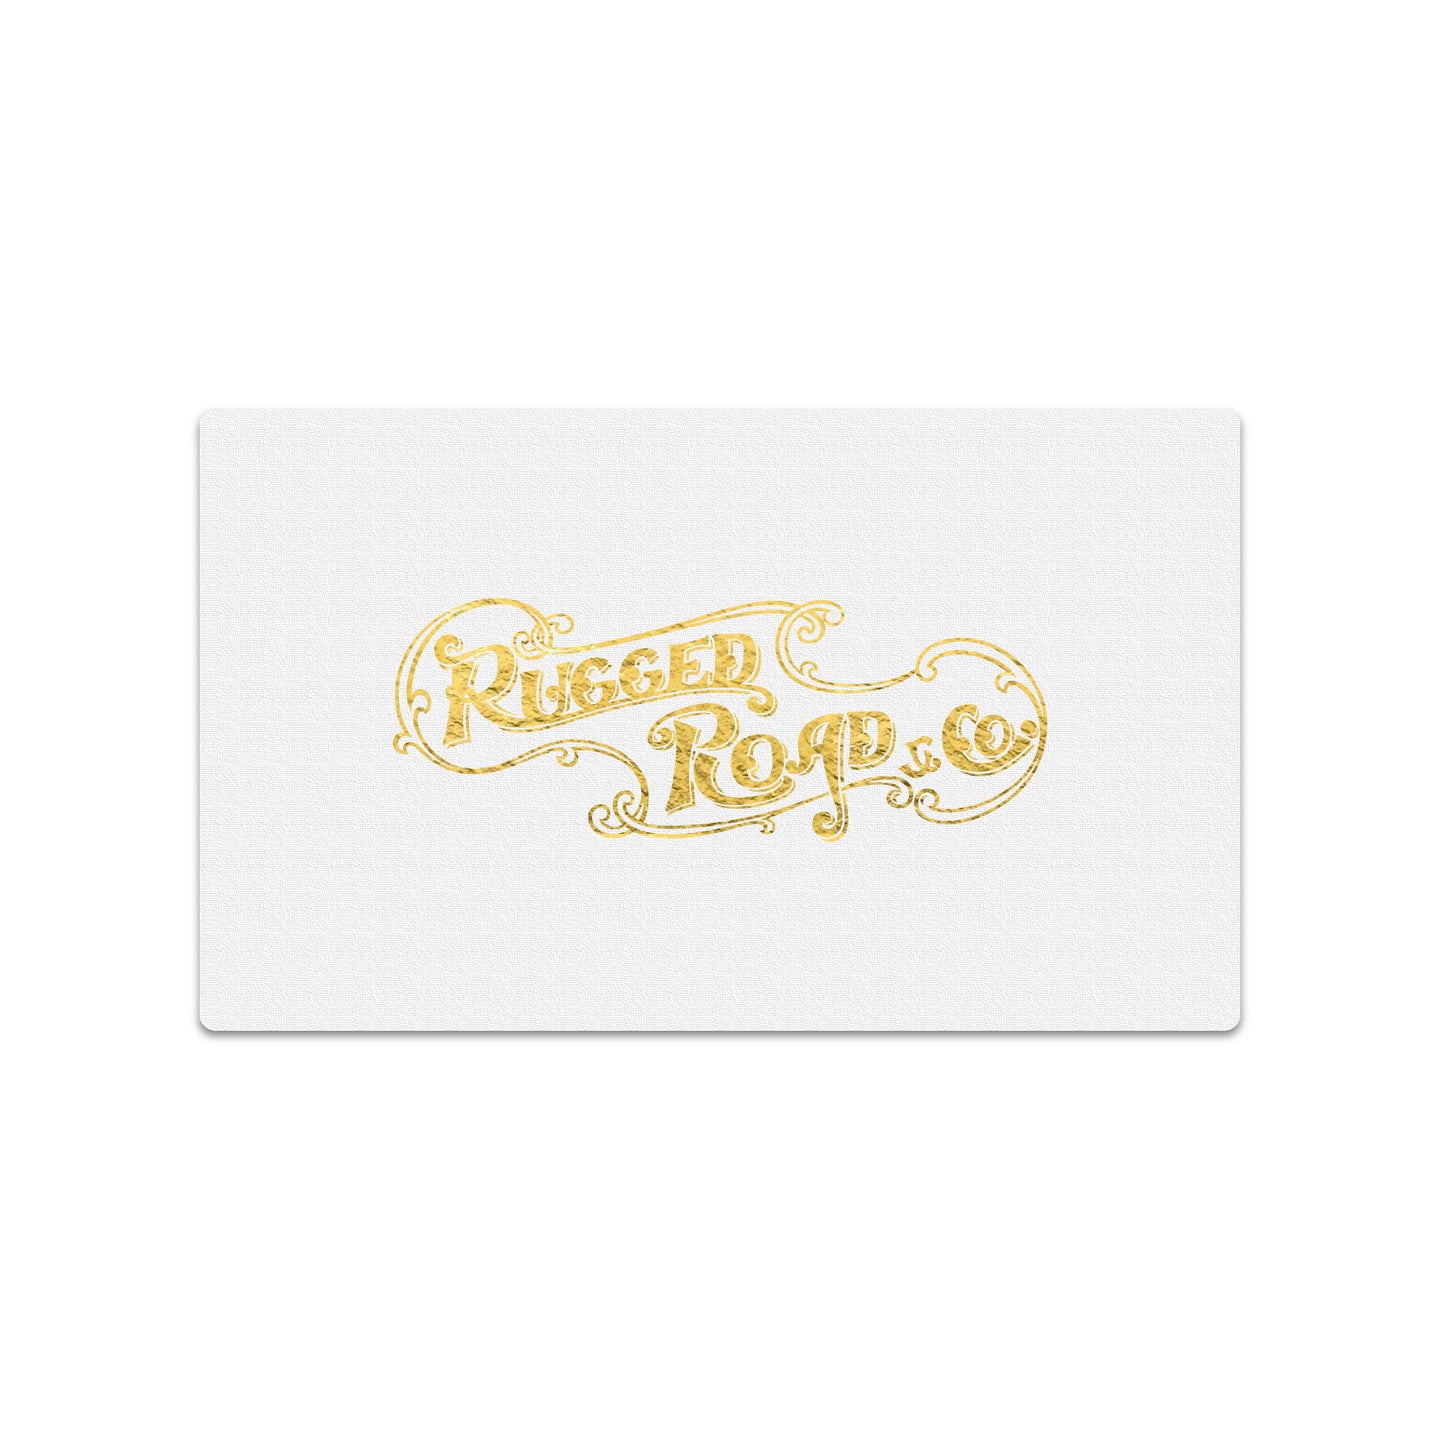 Rugged Road & Co. Gift Card